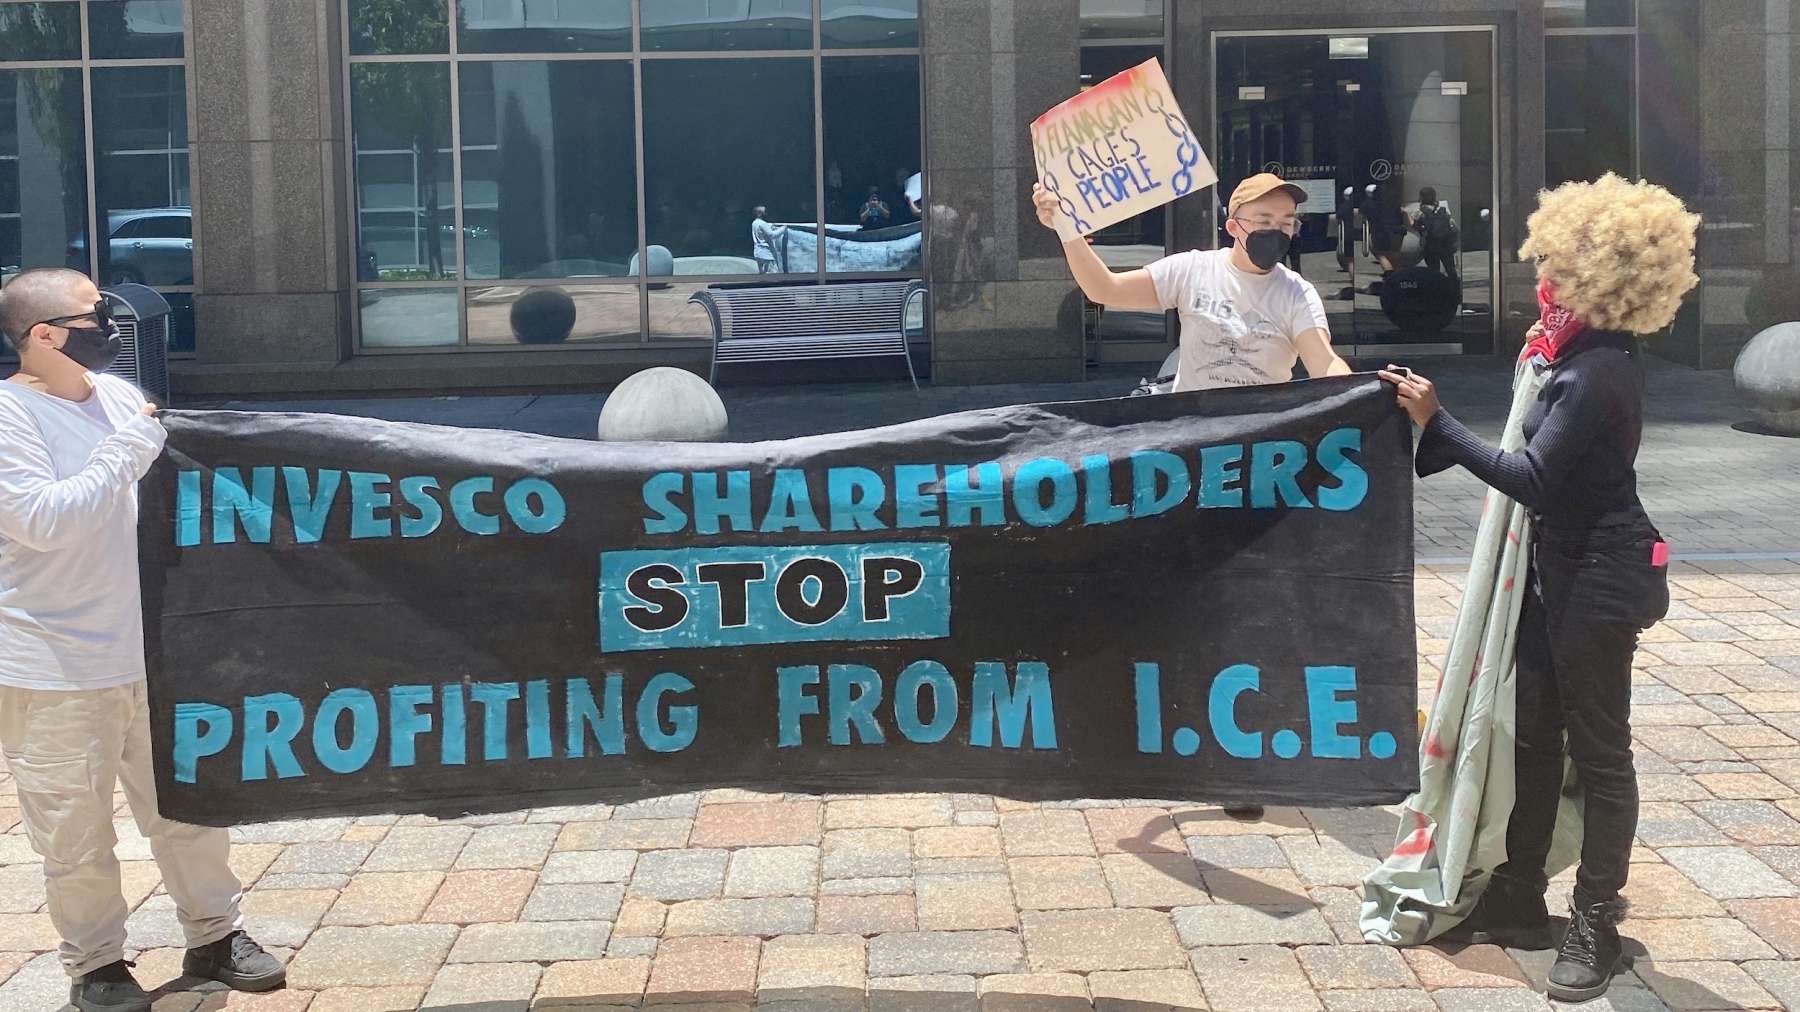 AMOR and FANG disrupt Invesco shareholder meeting, arrests made